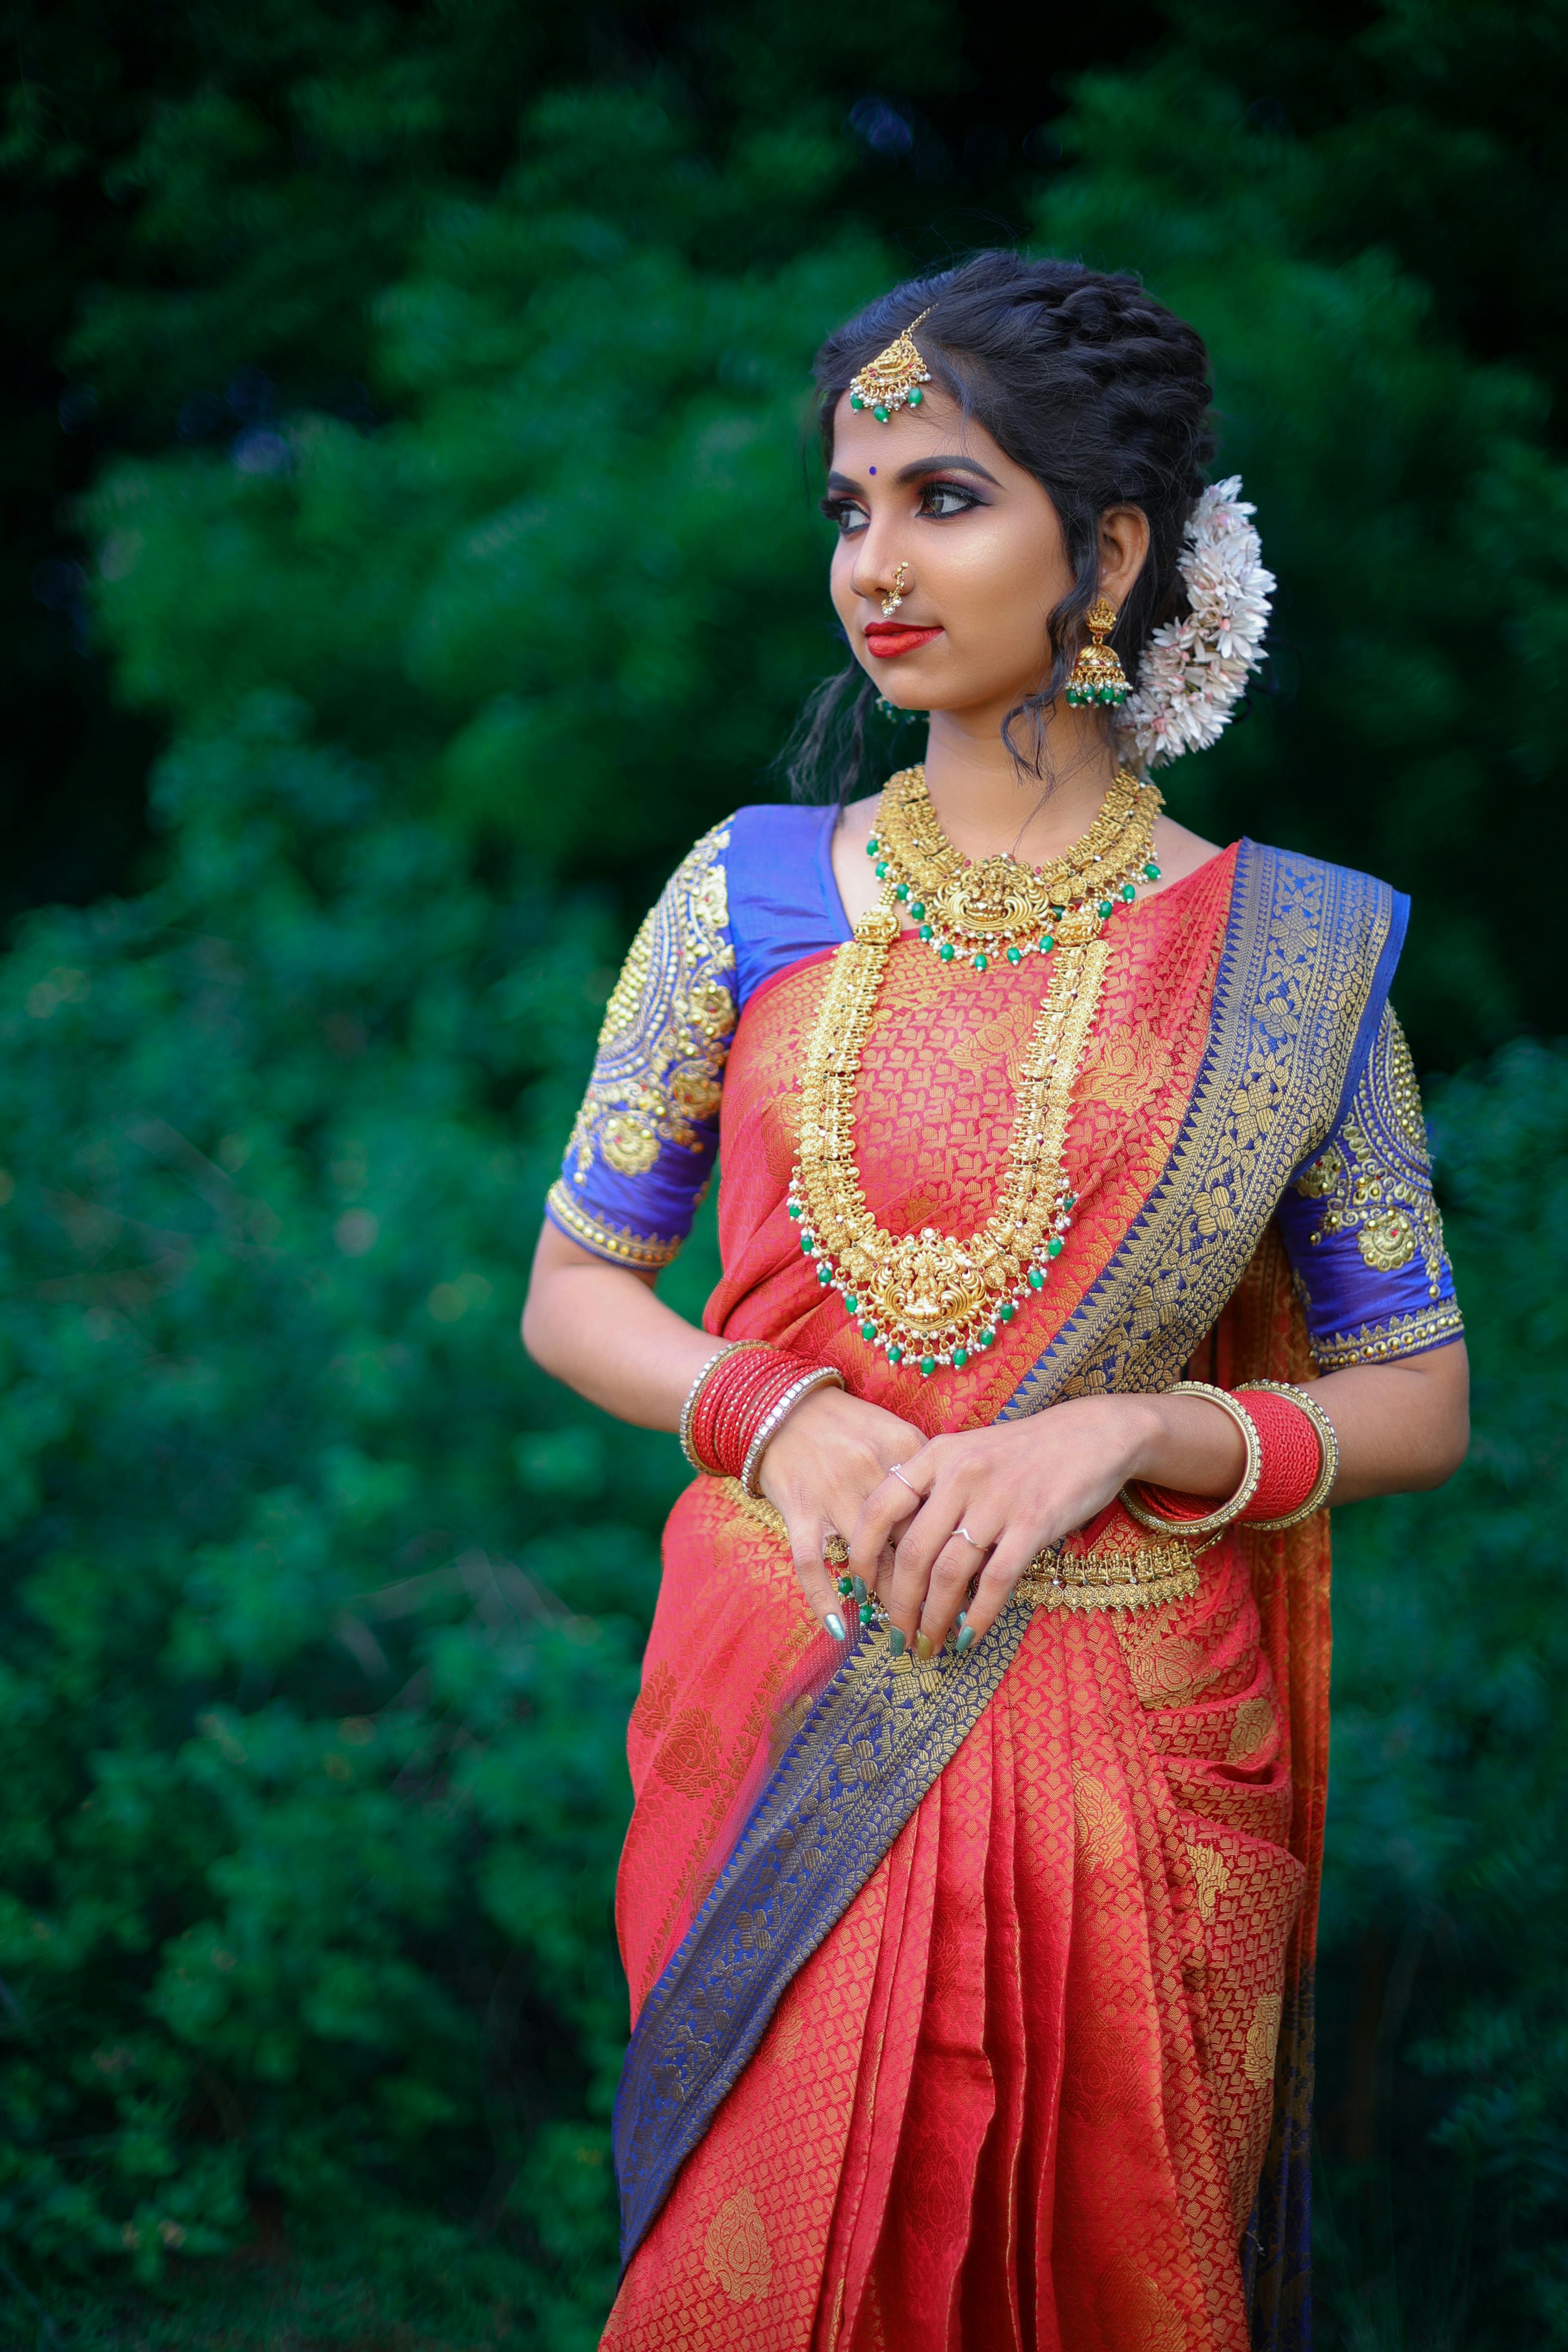 Indian traditional costume jewelry match perfect with outfit - Rani boutique